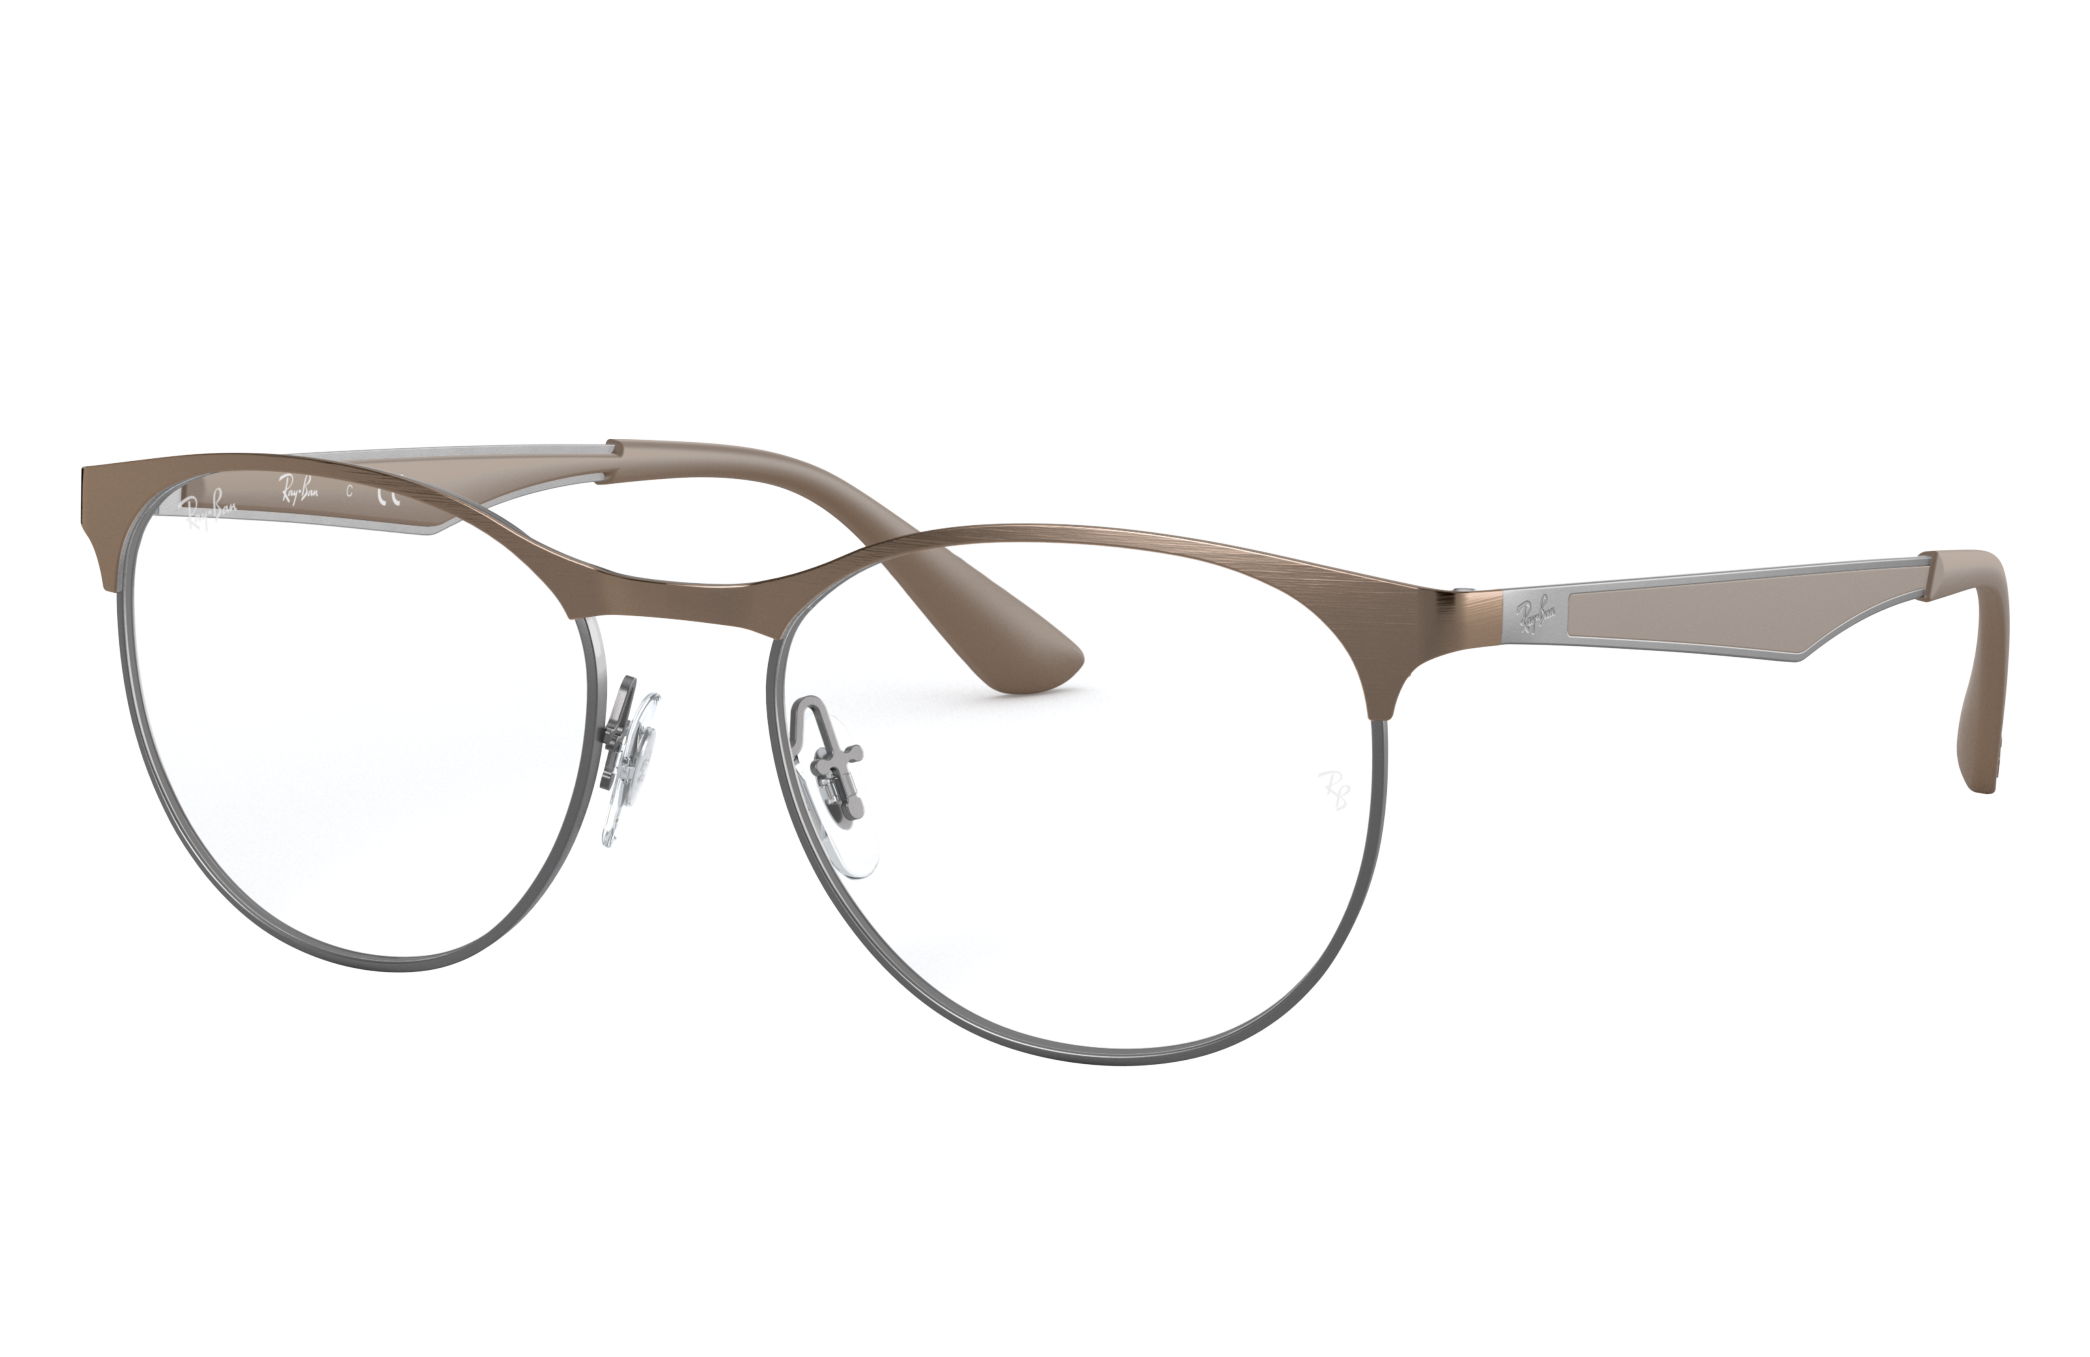 Rb6365 Eyeglasses with Brown Frame - RB6365 | Ray-Ban®